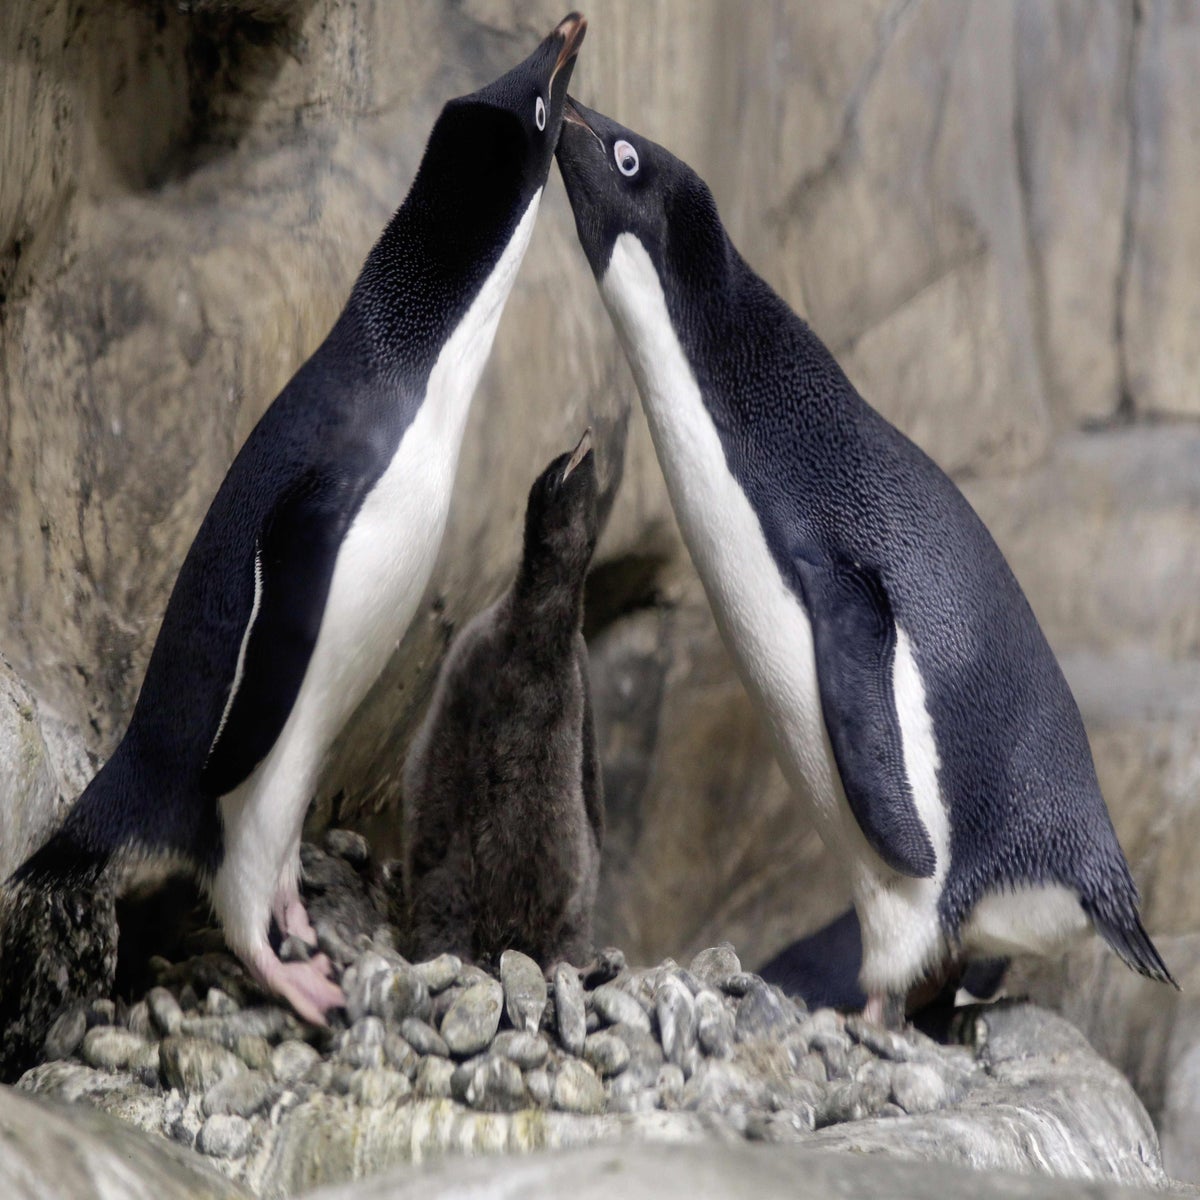 Antarctic penguins recognise themselves in mirror hinting they belong to  small list of self-aware animals | The Independent